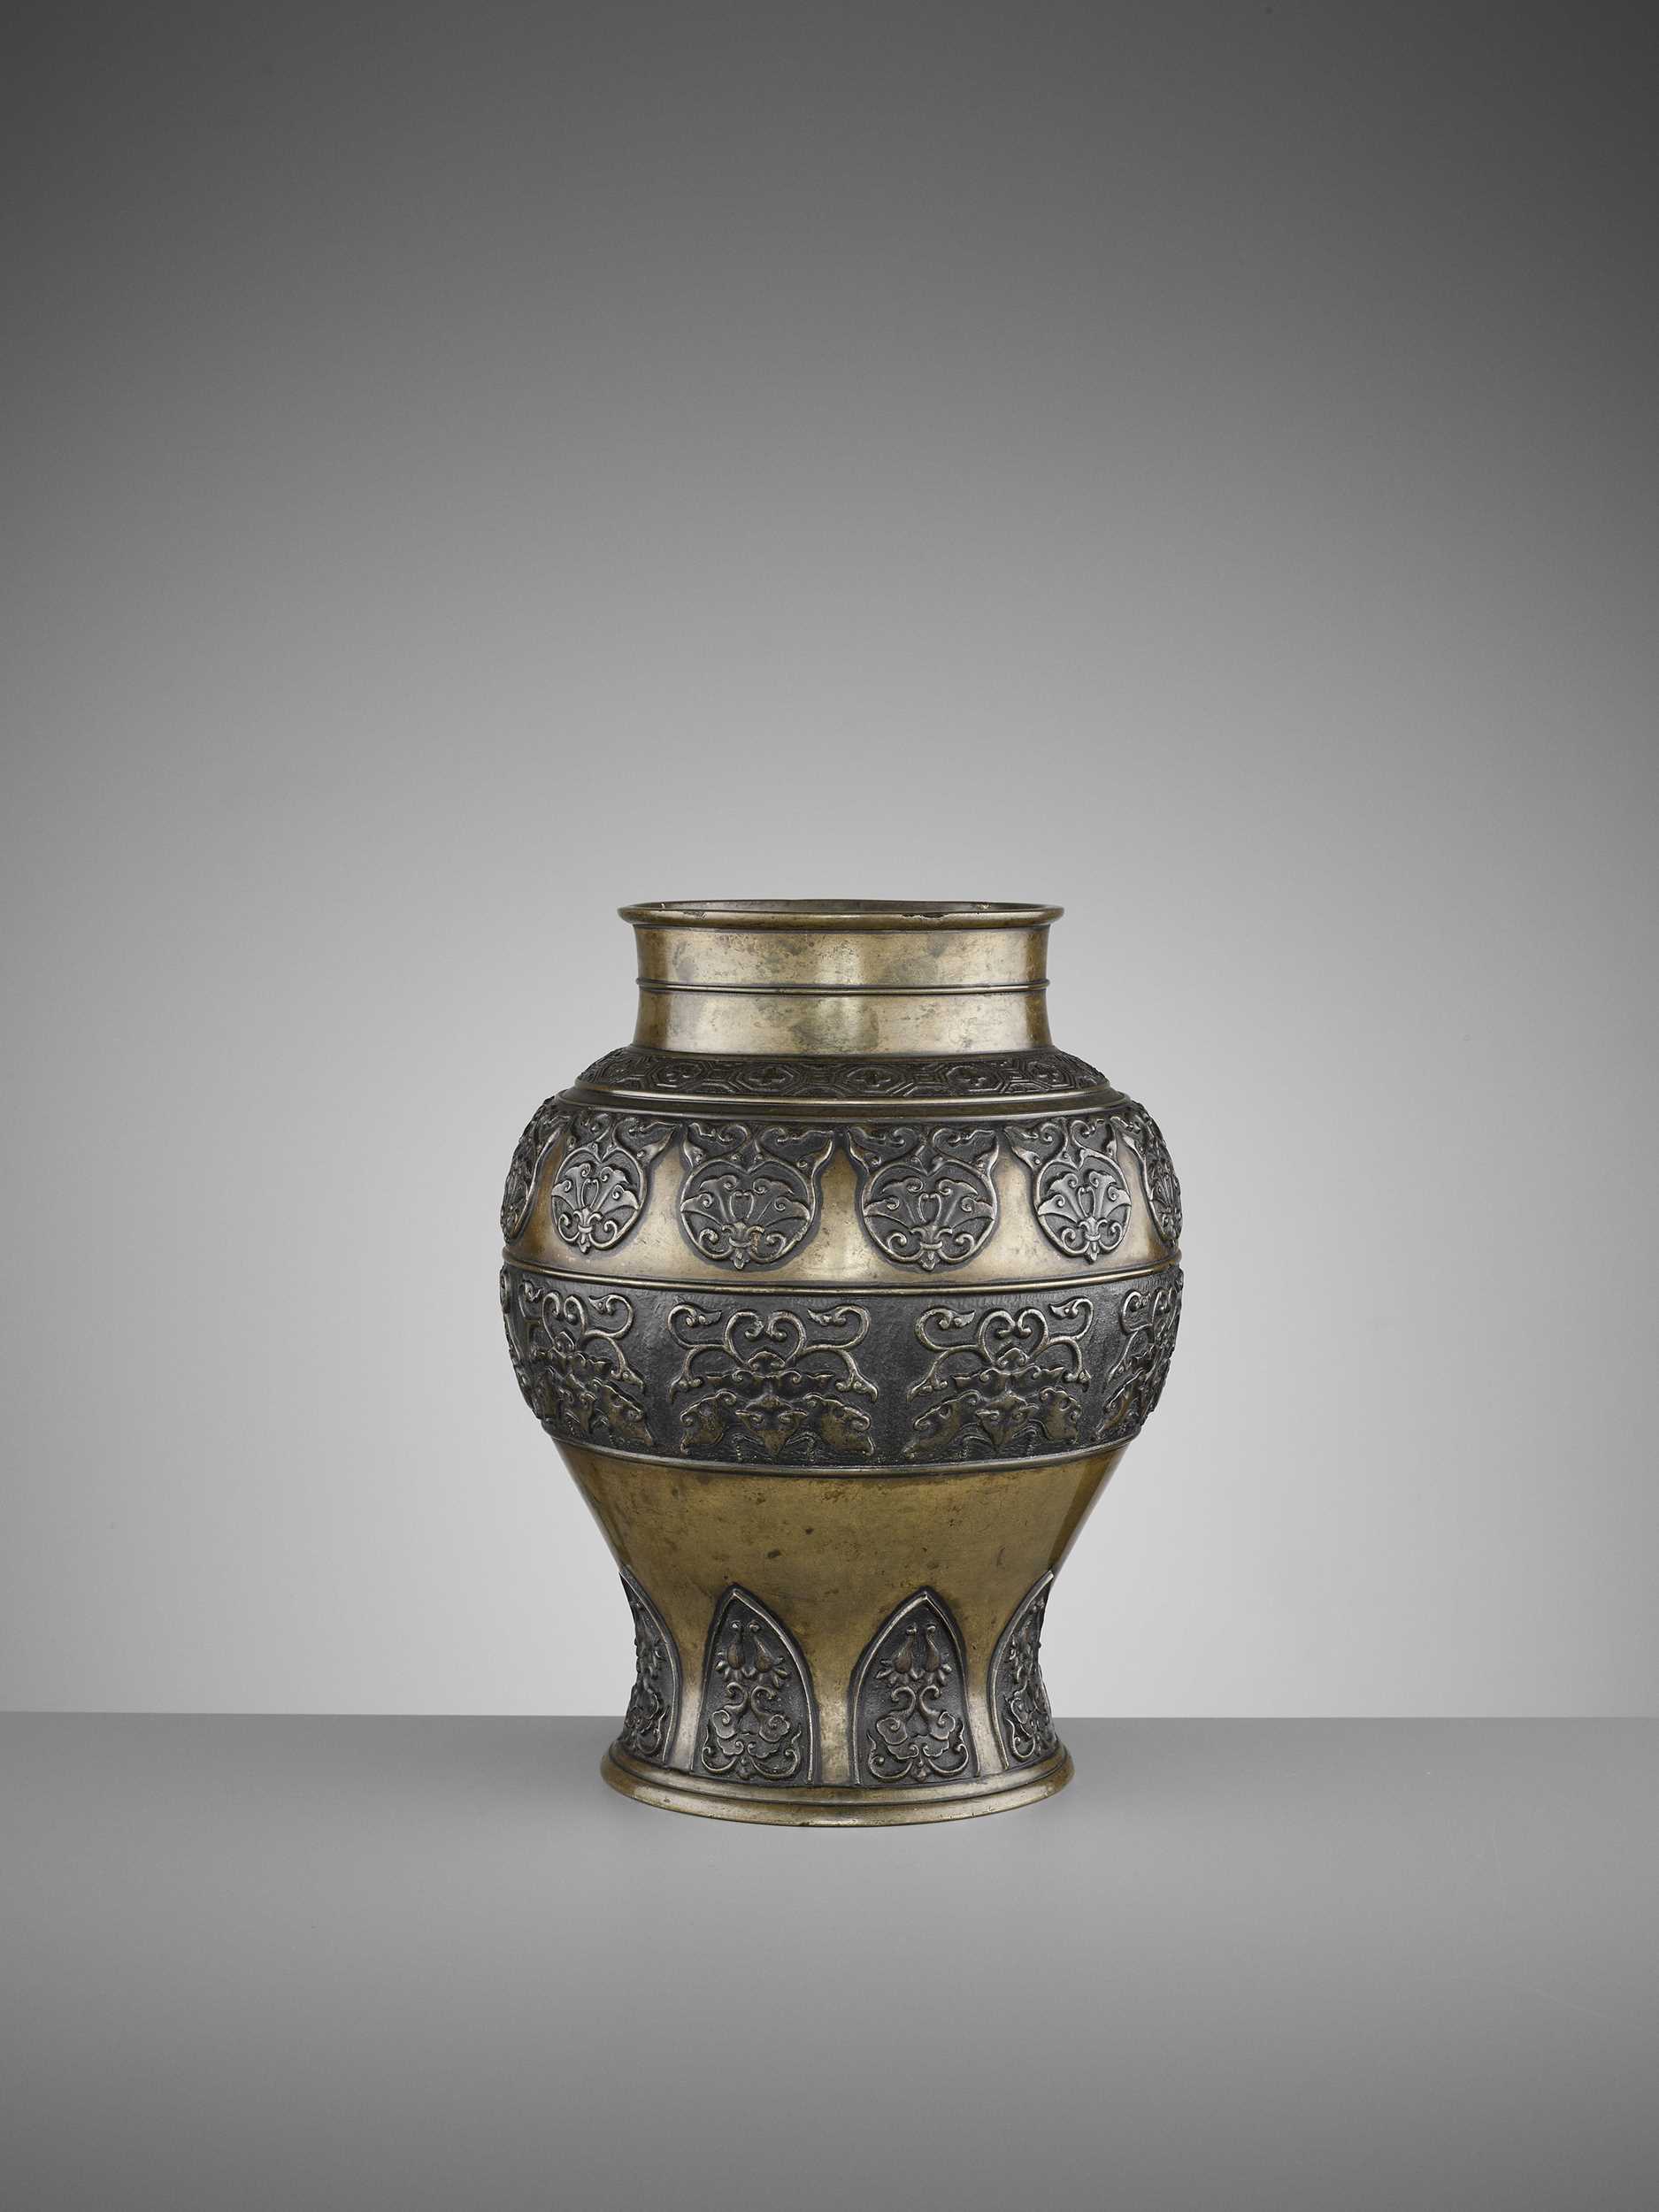 Lot 12 - AN ARCHAISTIC BRONZE BALUSTER VASE, 17TH CENTURY